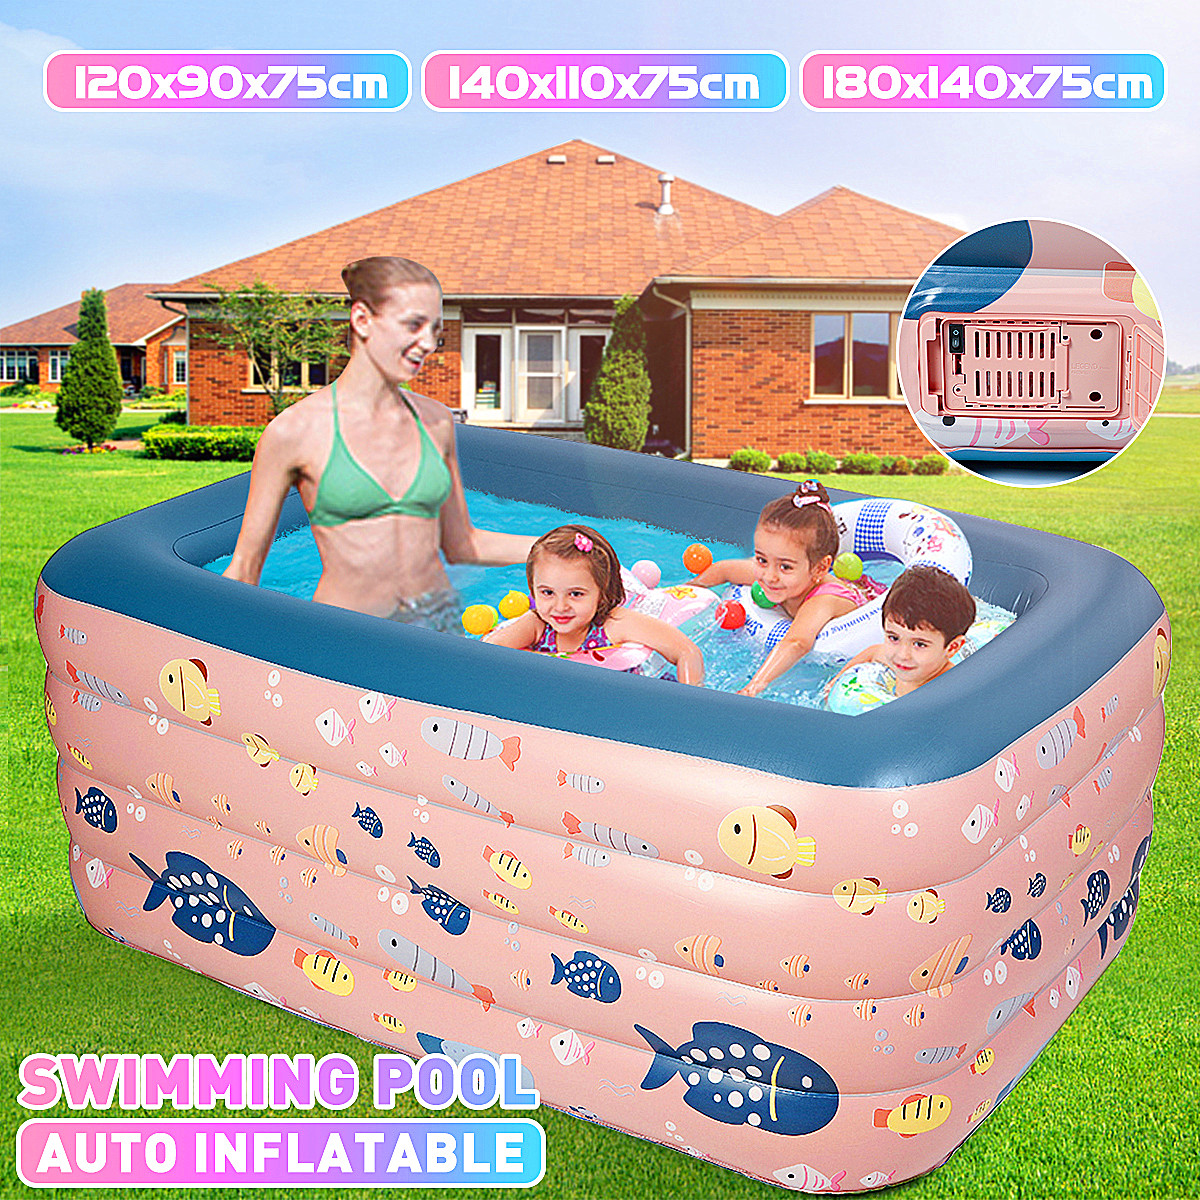 1.2M/1.4M/1.8M Inflatable Swimming Pool Adults Kids Pool Bathing Tub for Children Outdoor Indoor Swimming Pool